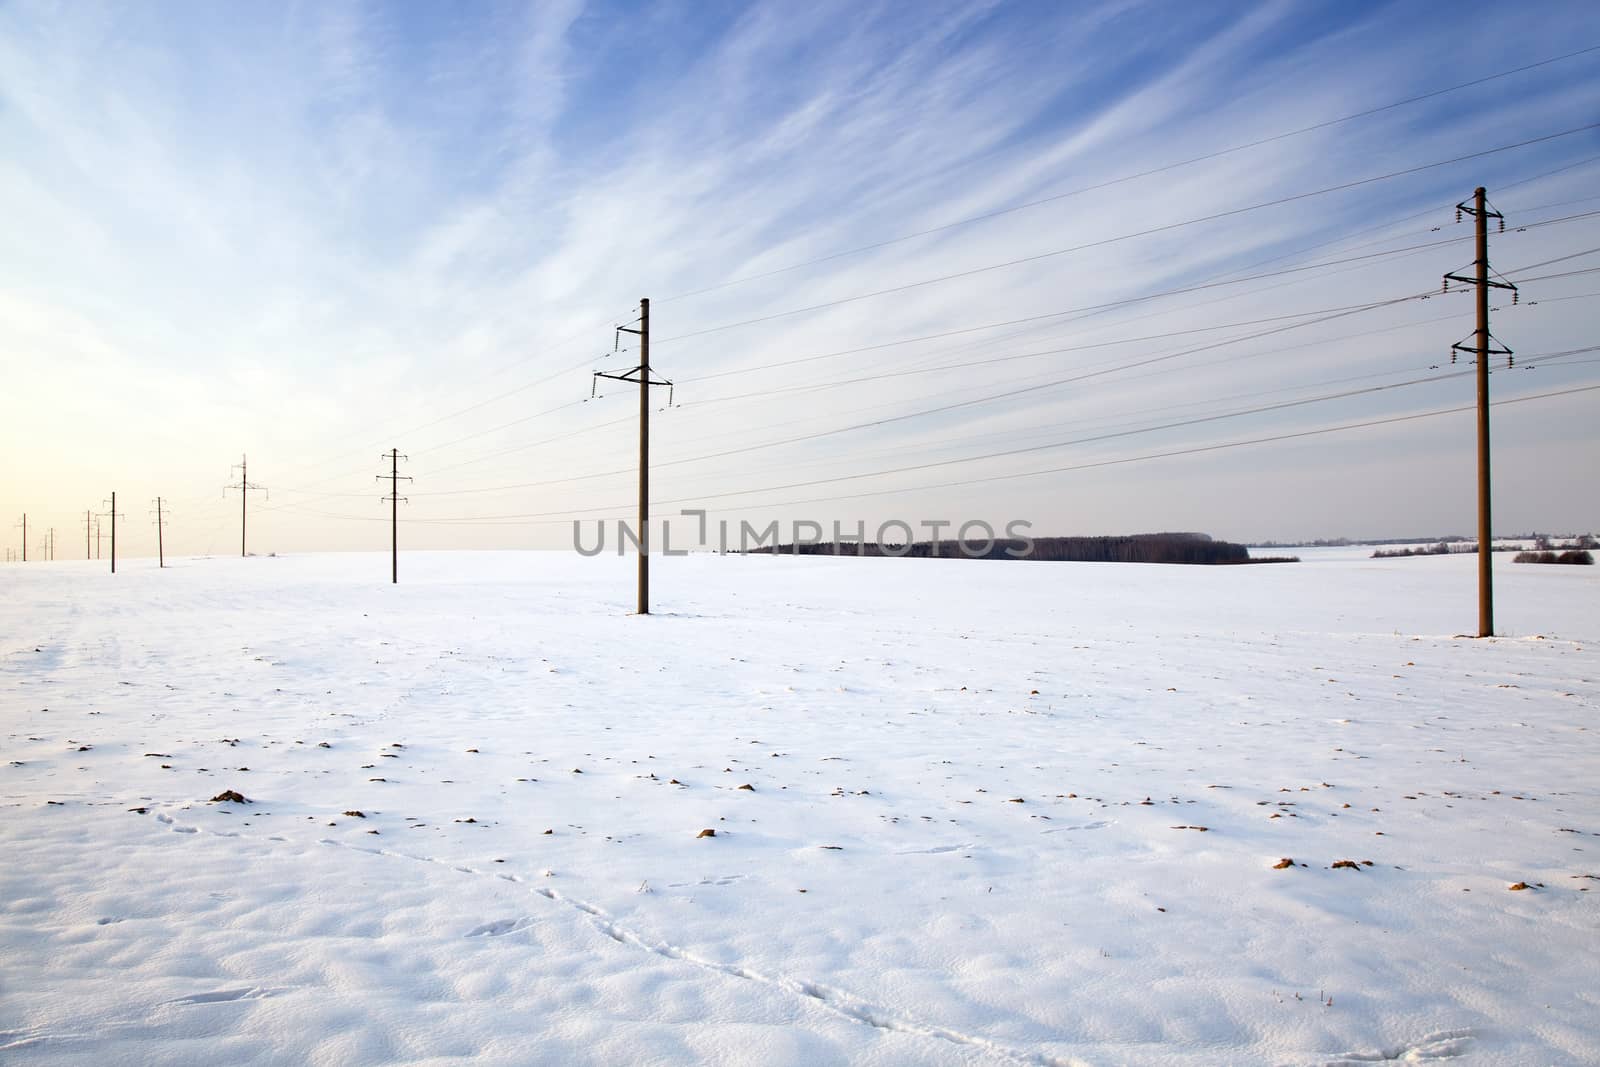   the electric columns put through an agricultural field. winter